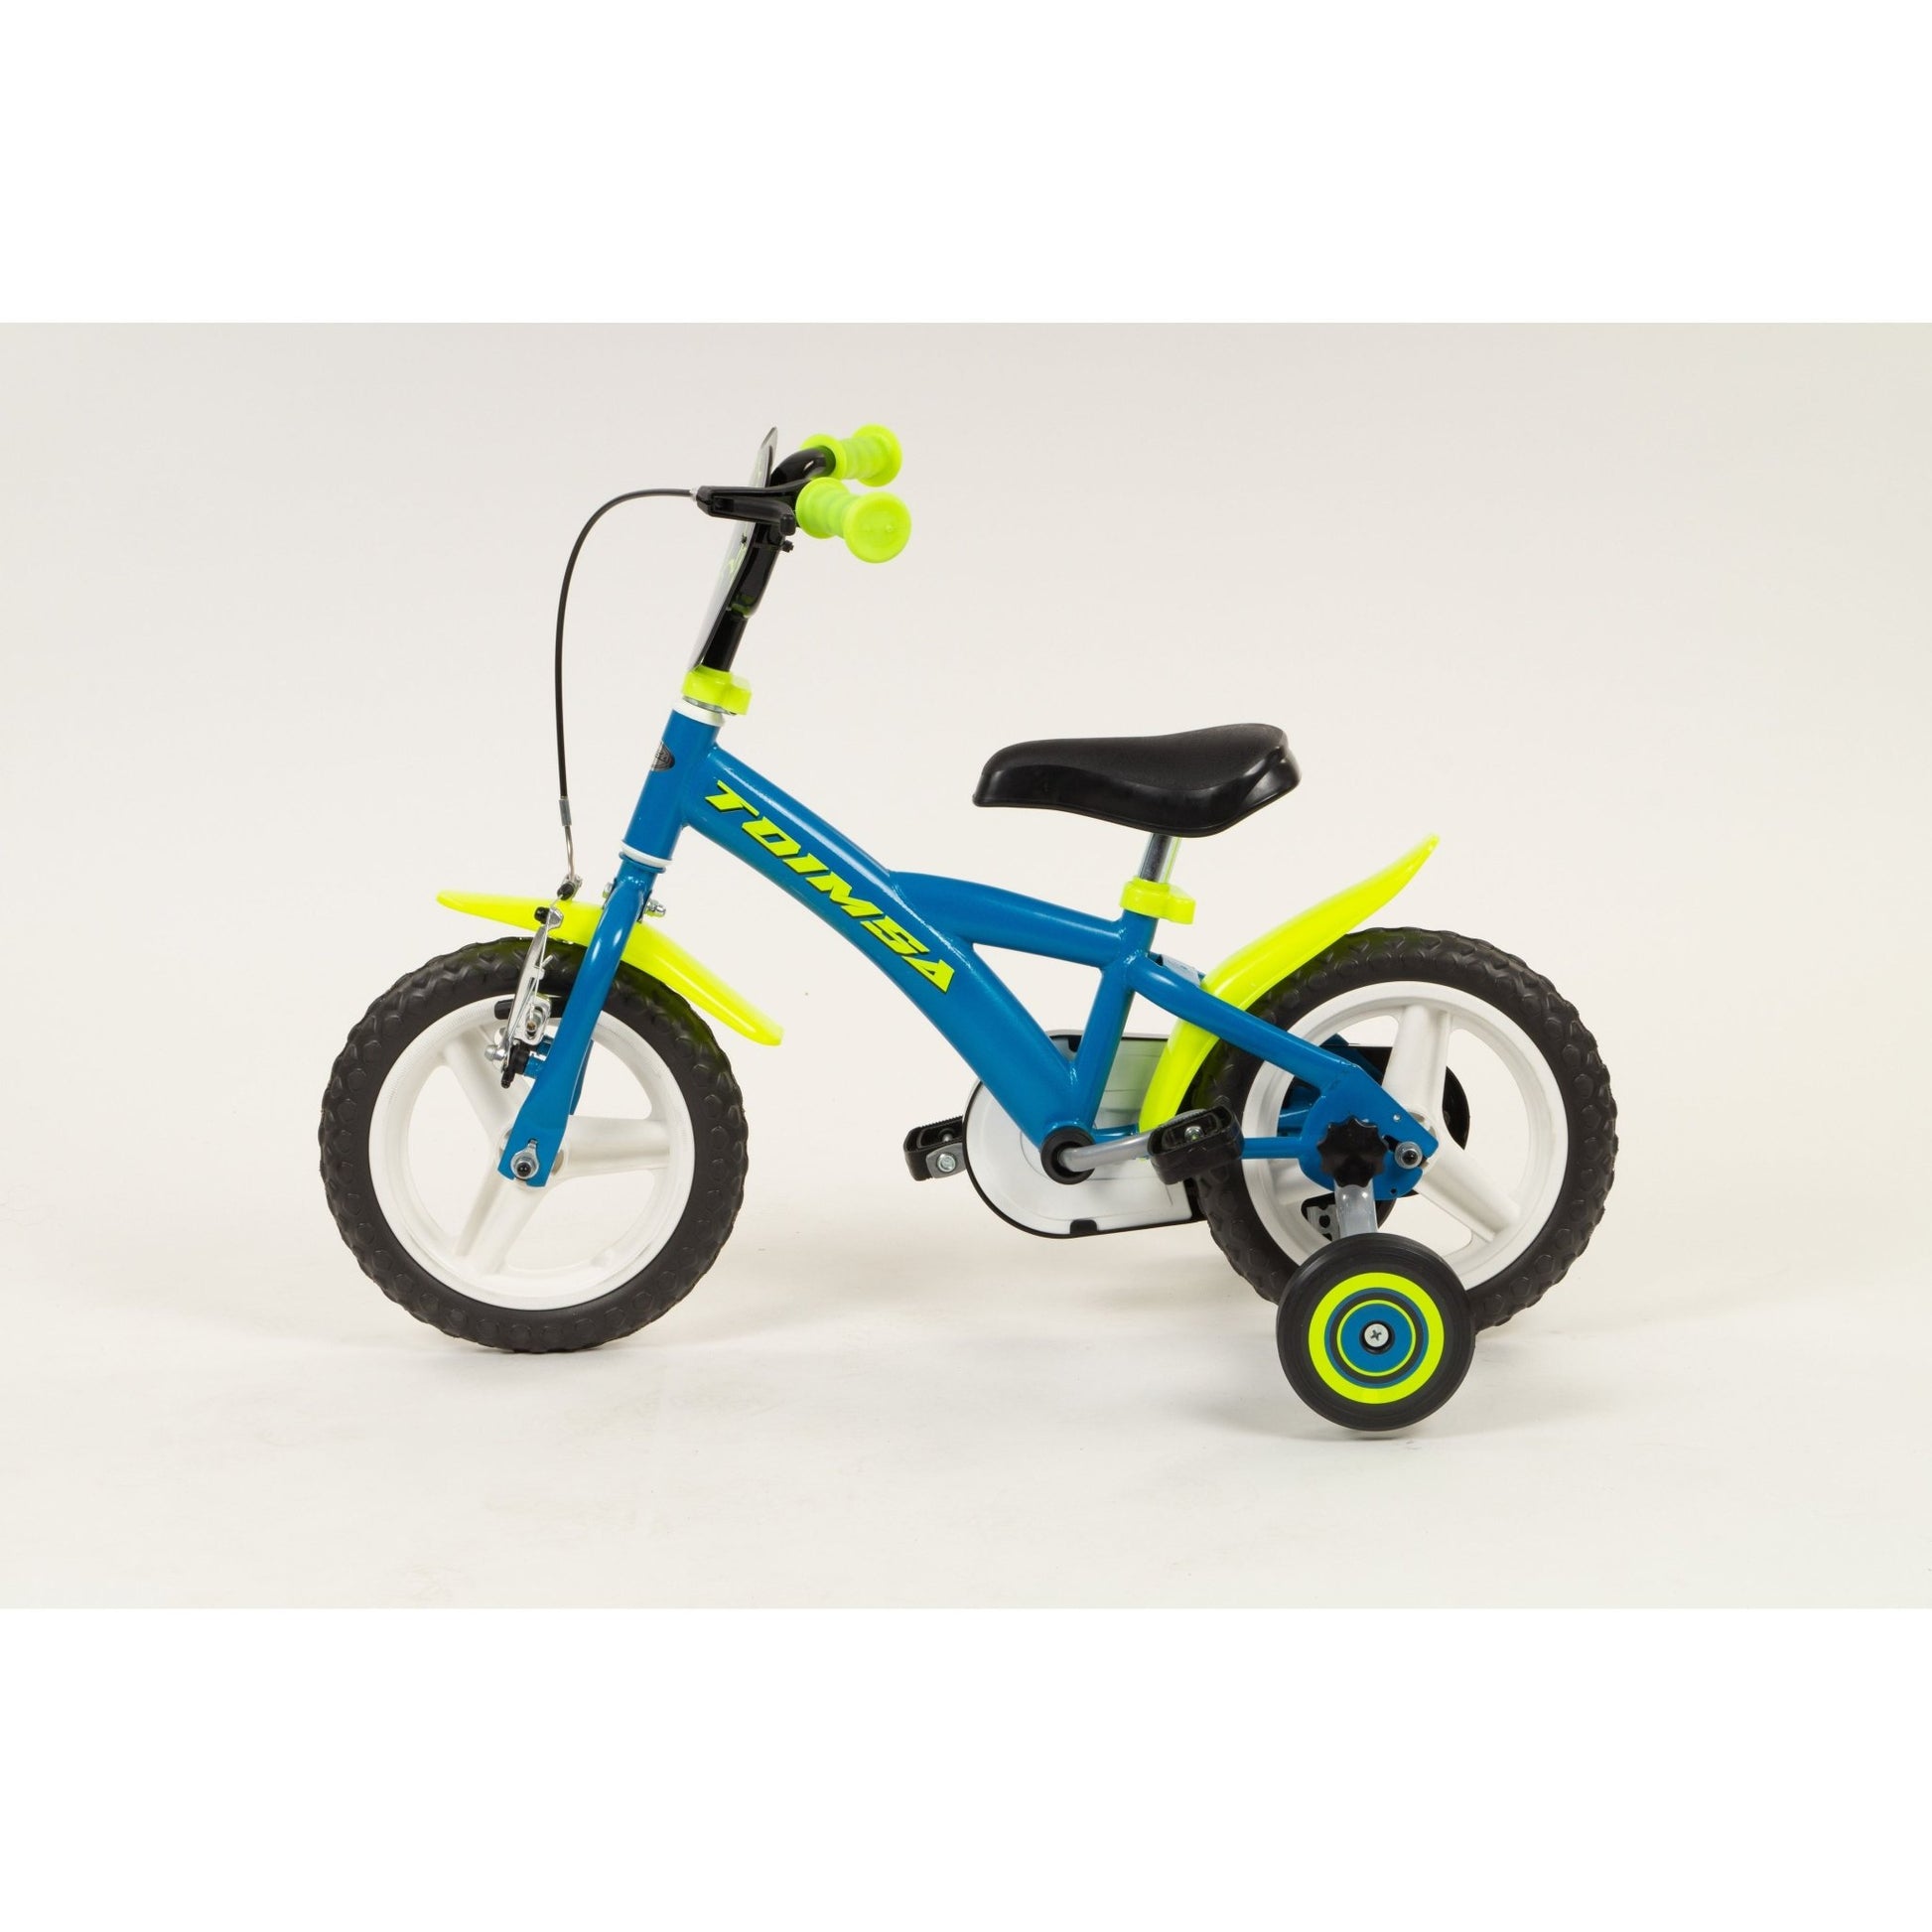 Lightening Childrens Bicycle 12 Inch - The Online Toy Shop - Bicycle - 8